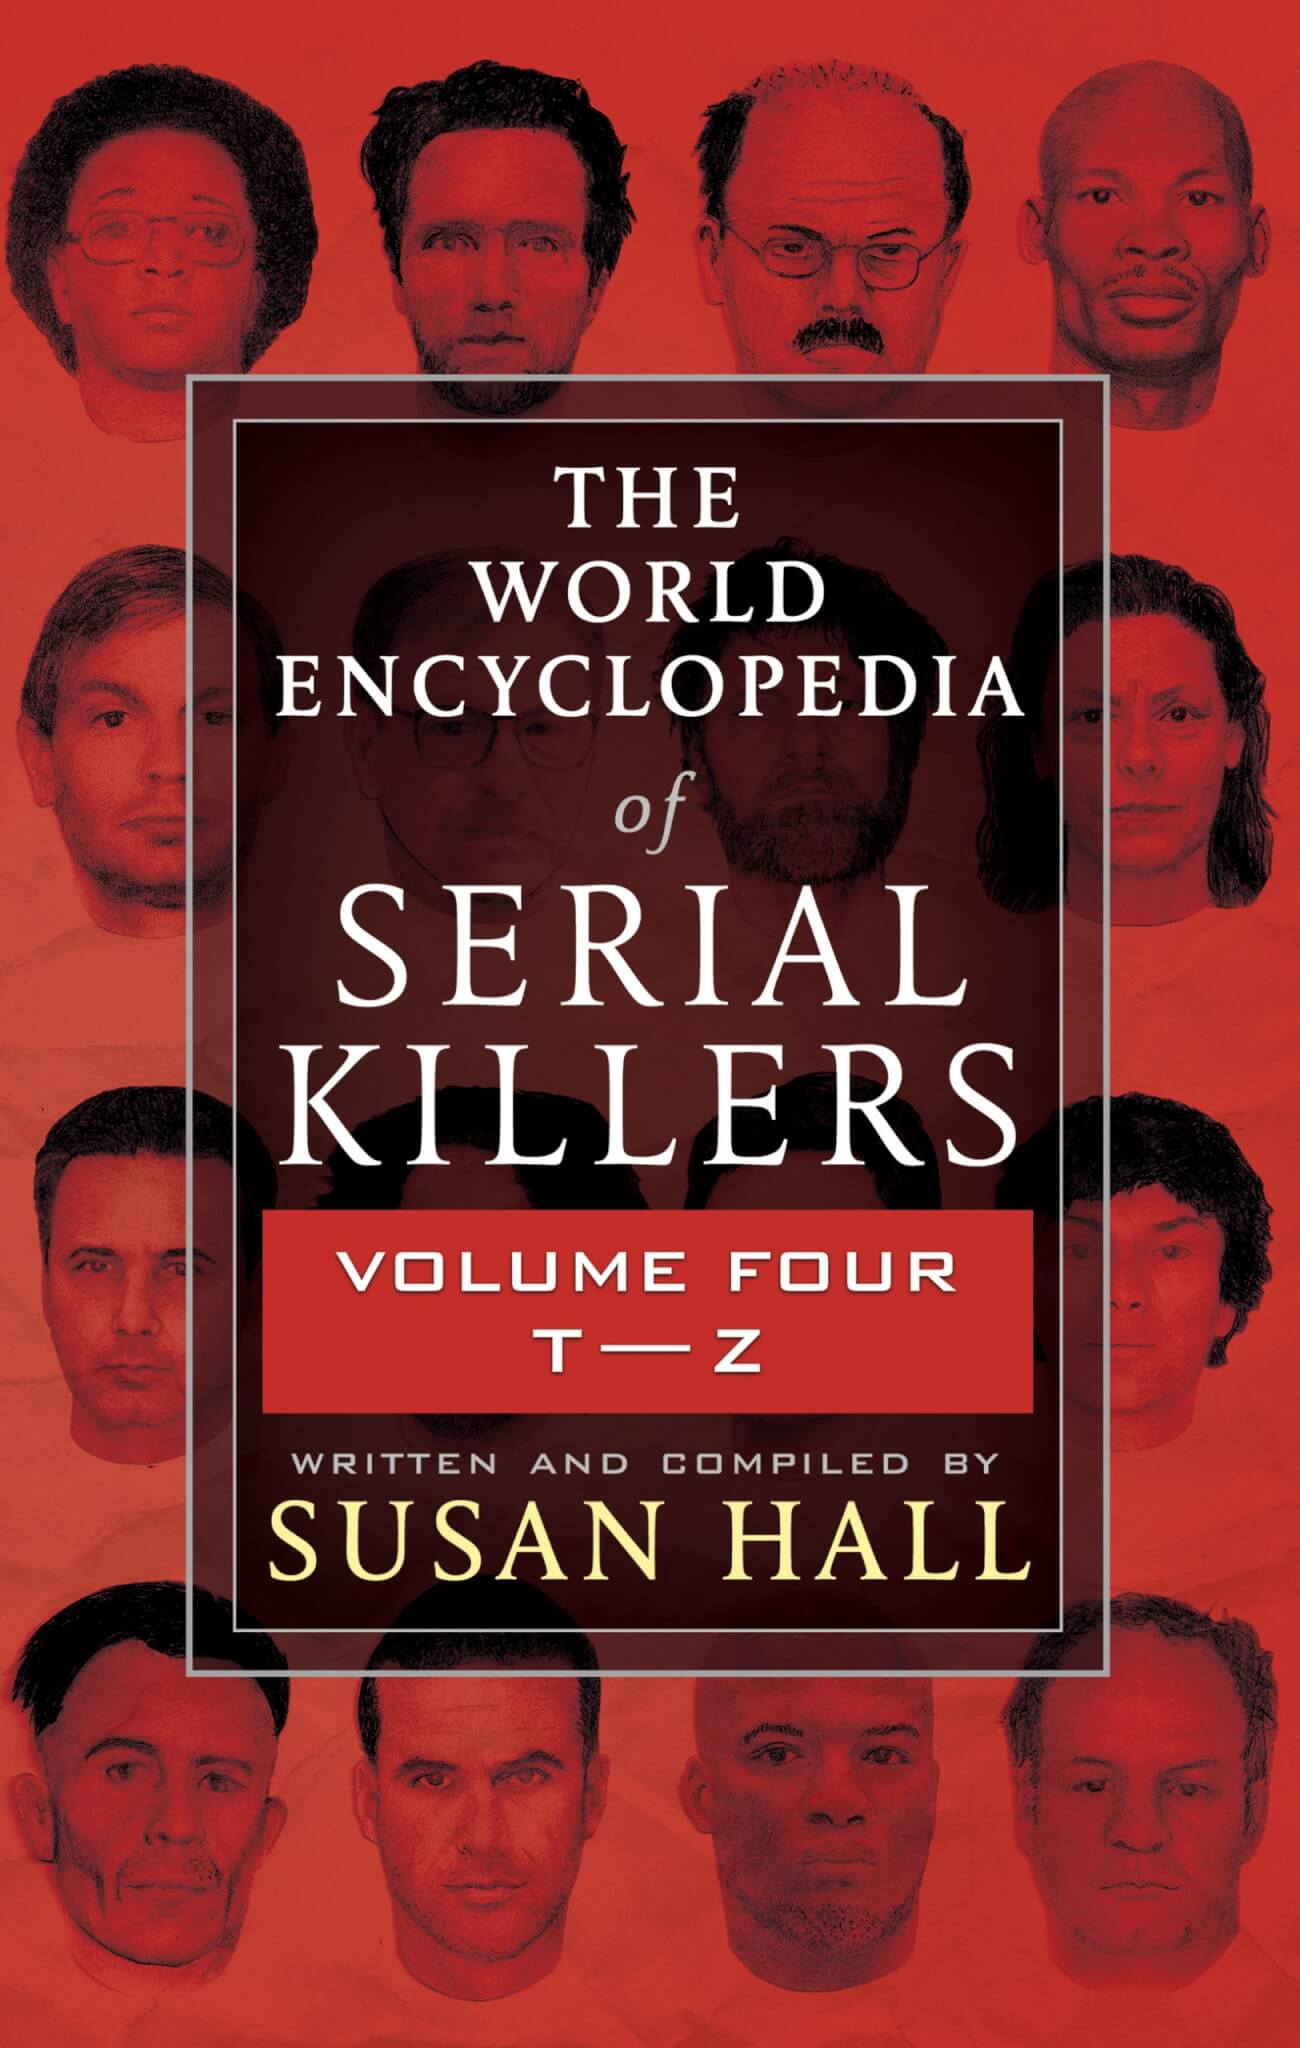 The World Encyclopedia Of Serial Killers Volume Four:  Audio Books Available